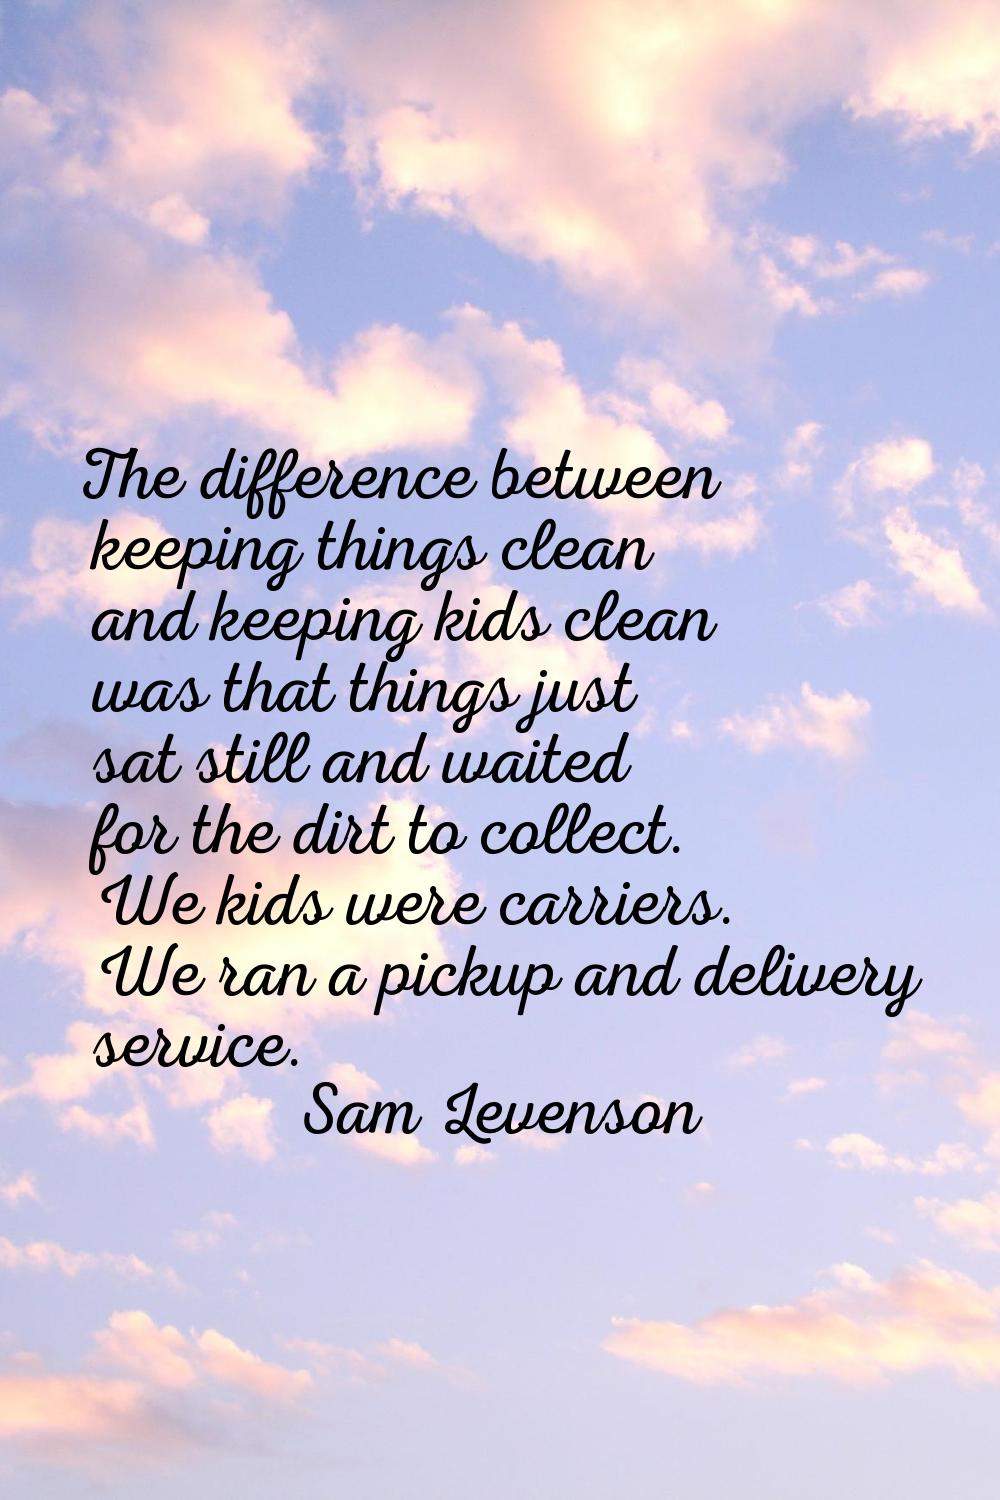 The difference between keeping things clean and keeping kids clean was that things just sat still a